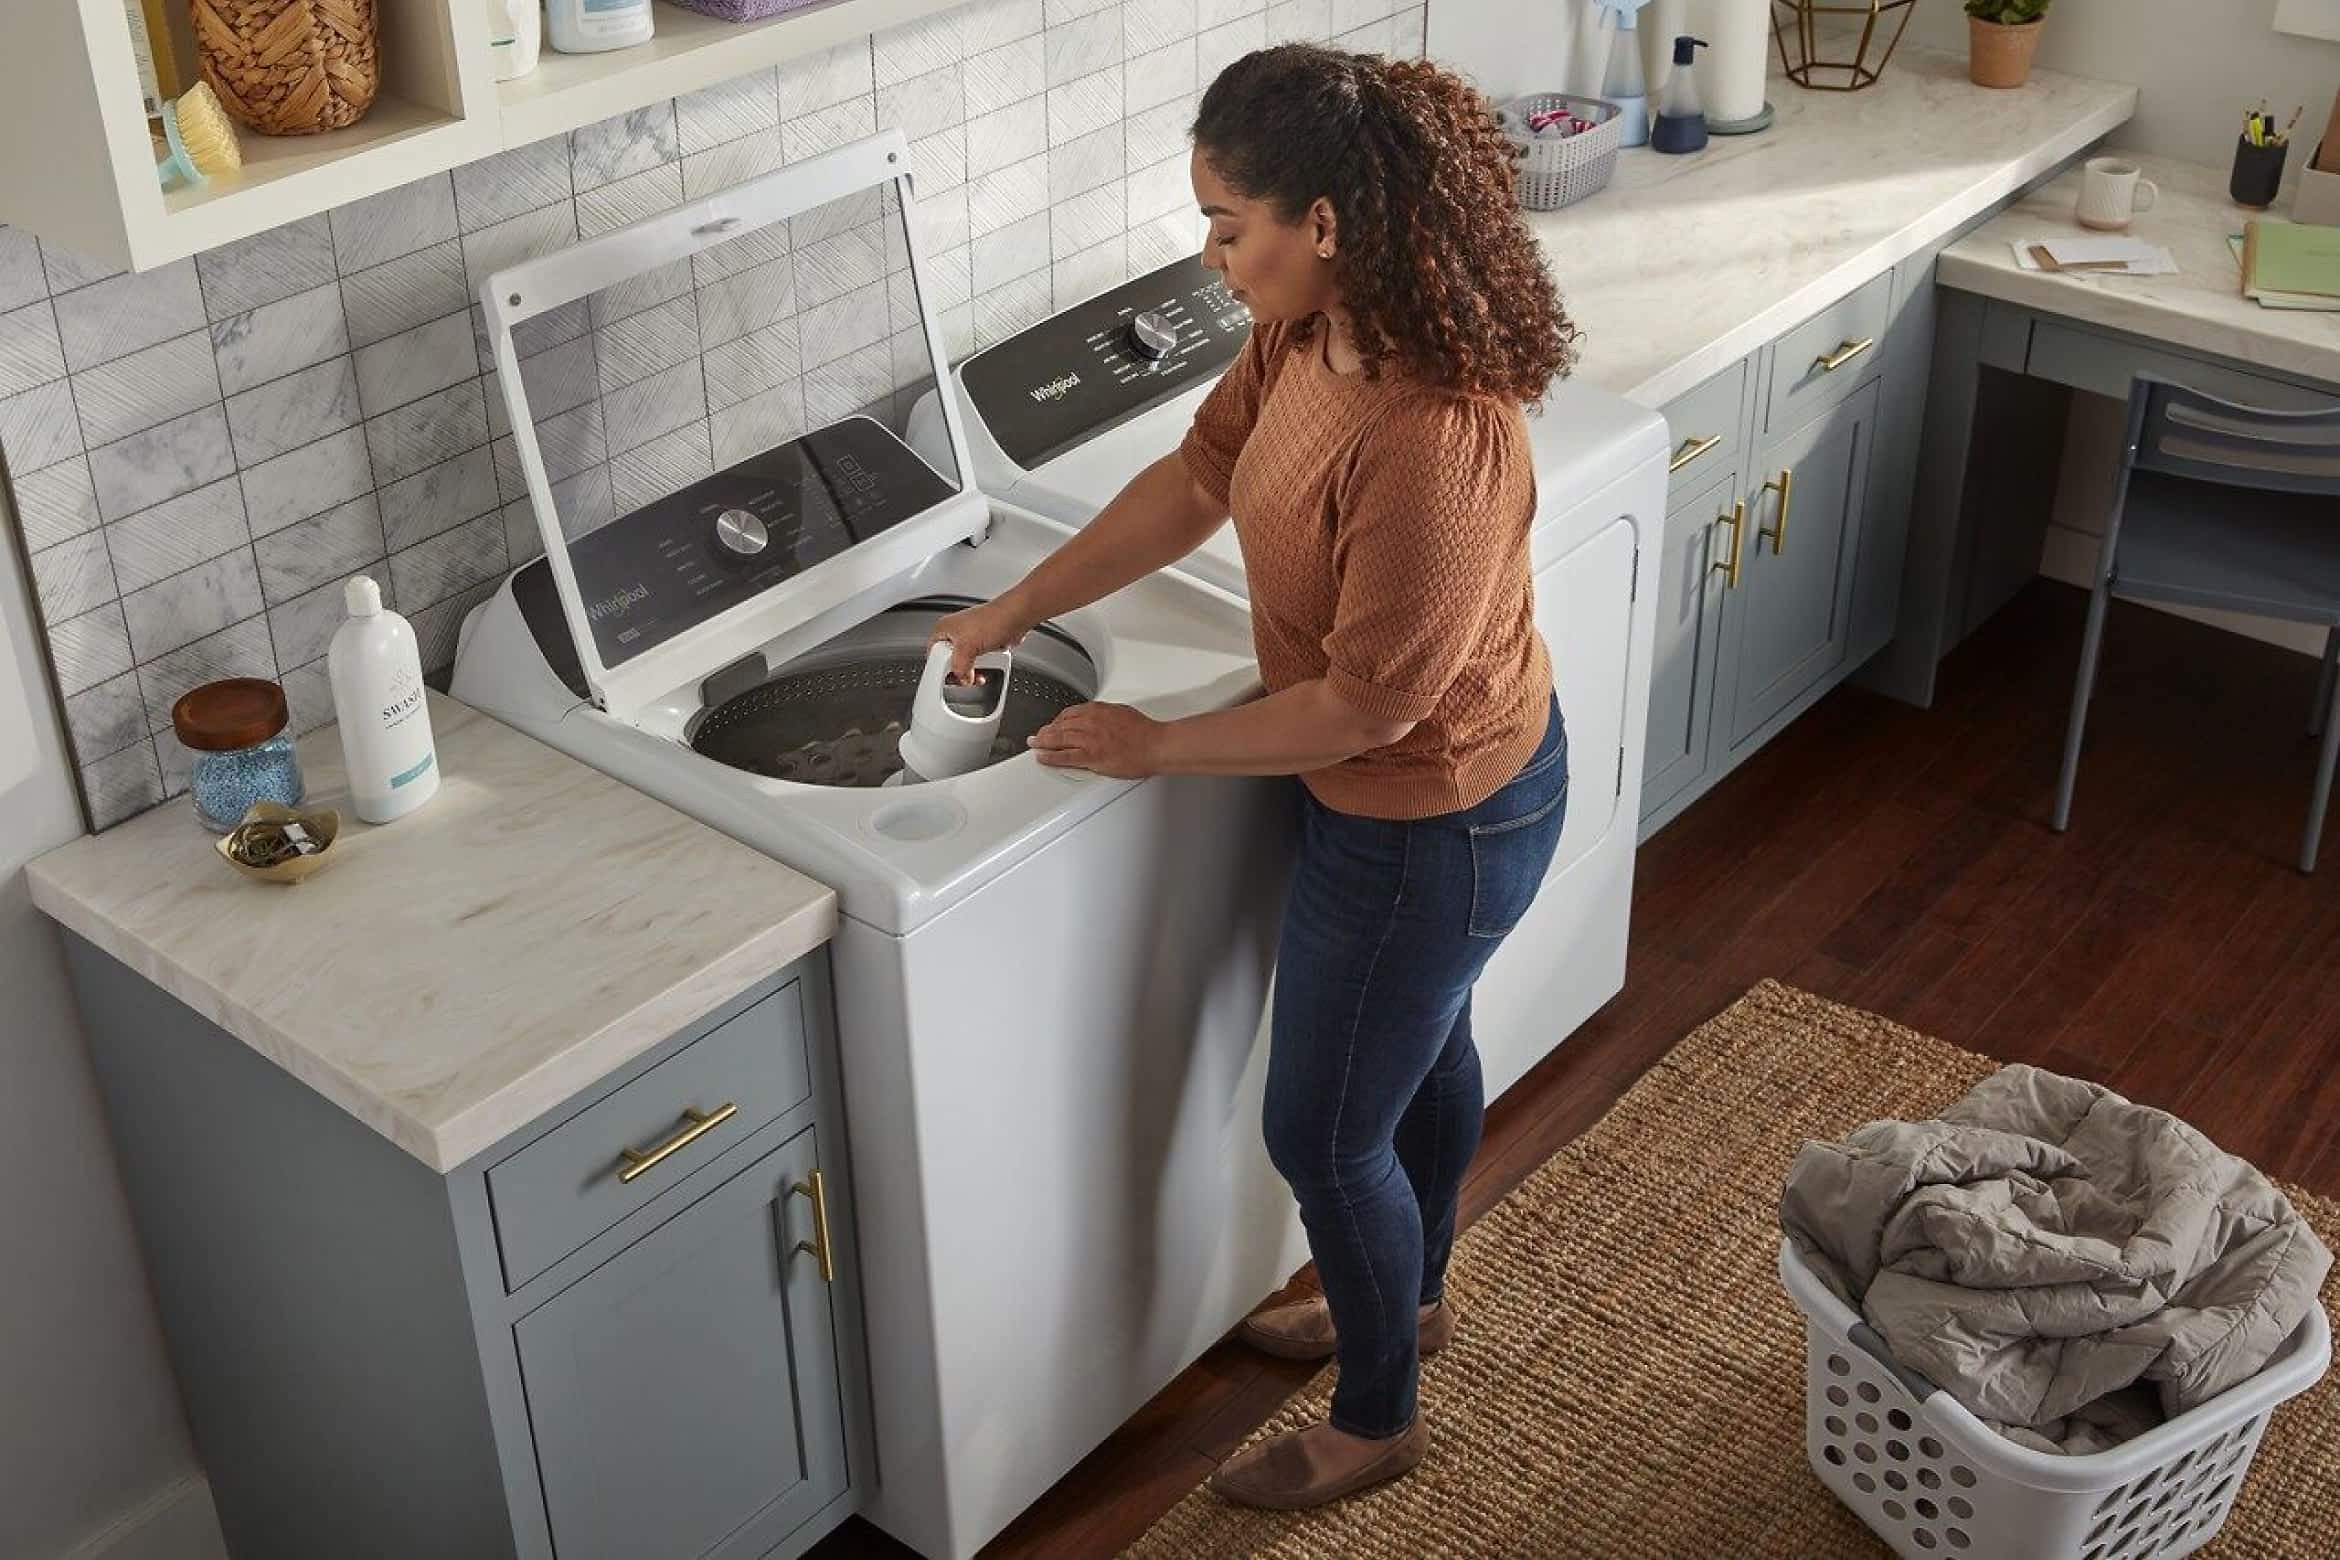 A woman unloads laundry from a Whirlpool® Top Load Washer